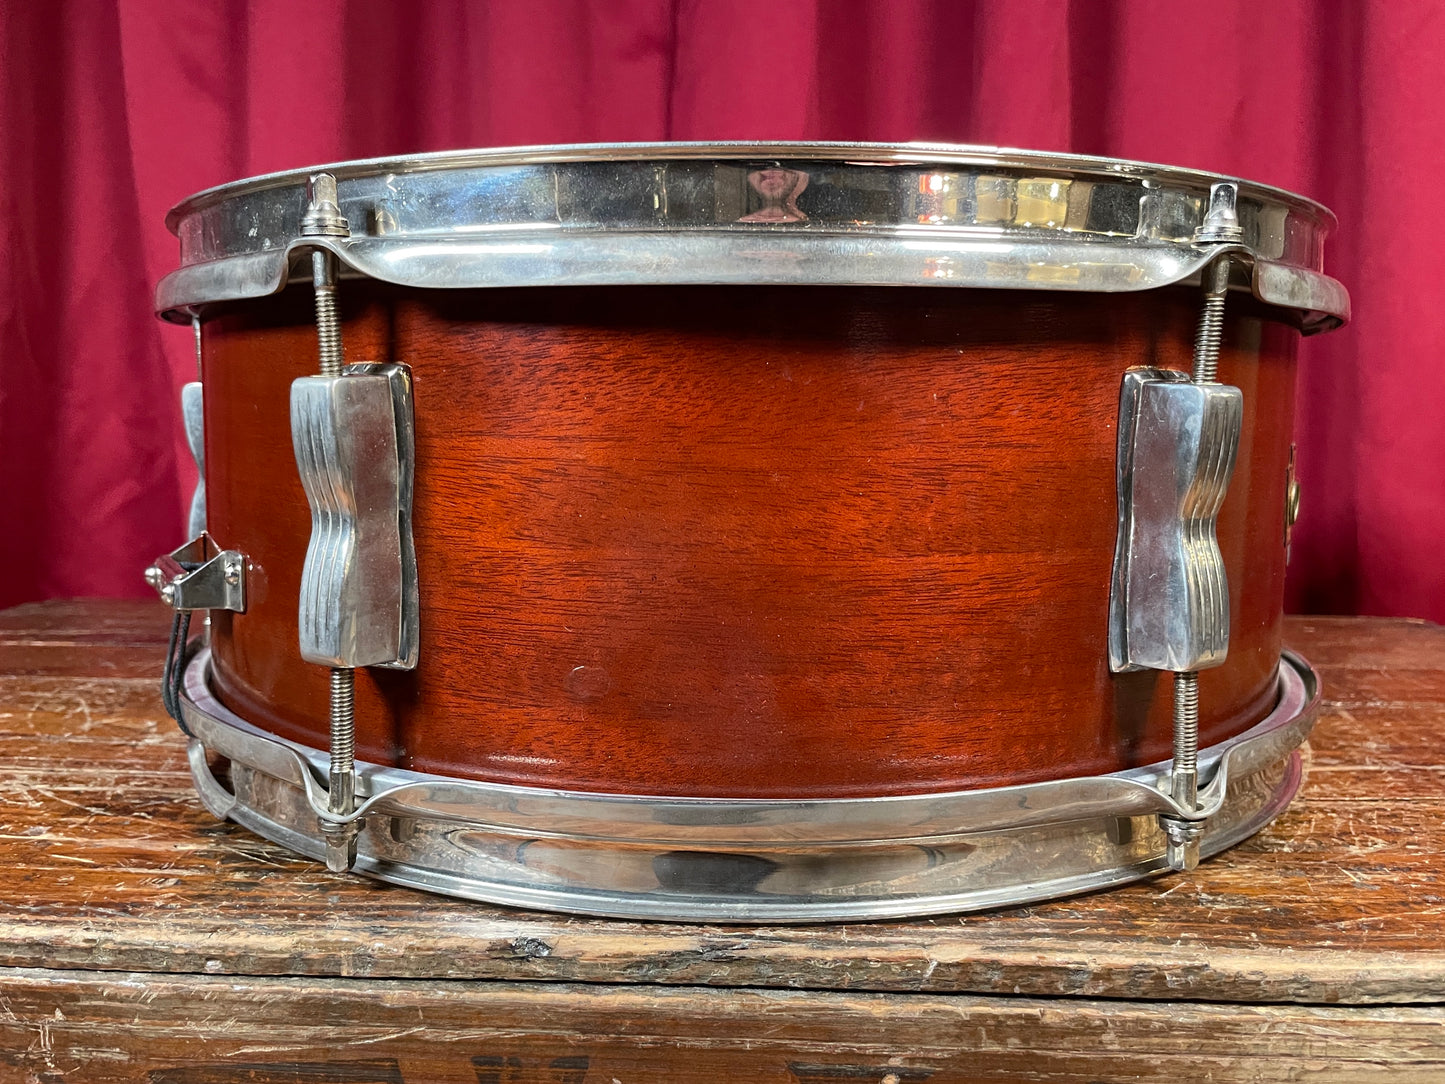 1957 WFL Ludwig 5.5x14 Model 491 Supreme Concert / Pioneer Snare Drum Mahogany